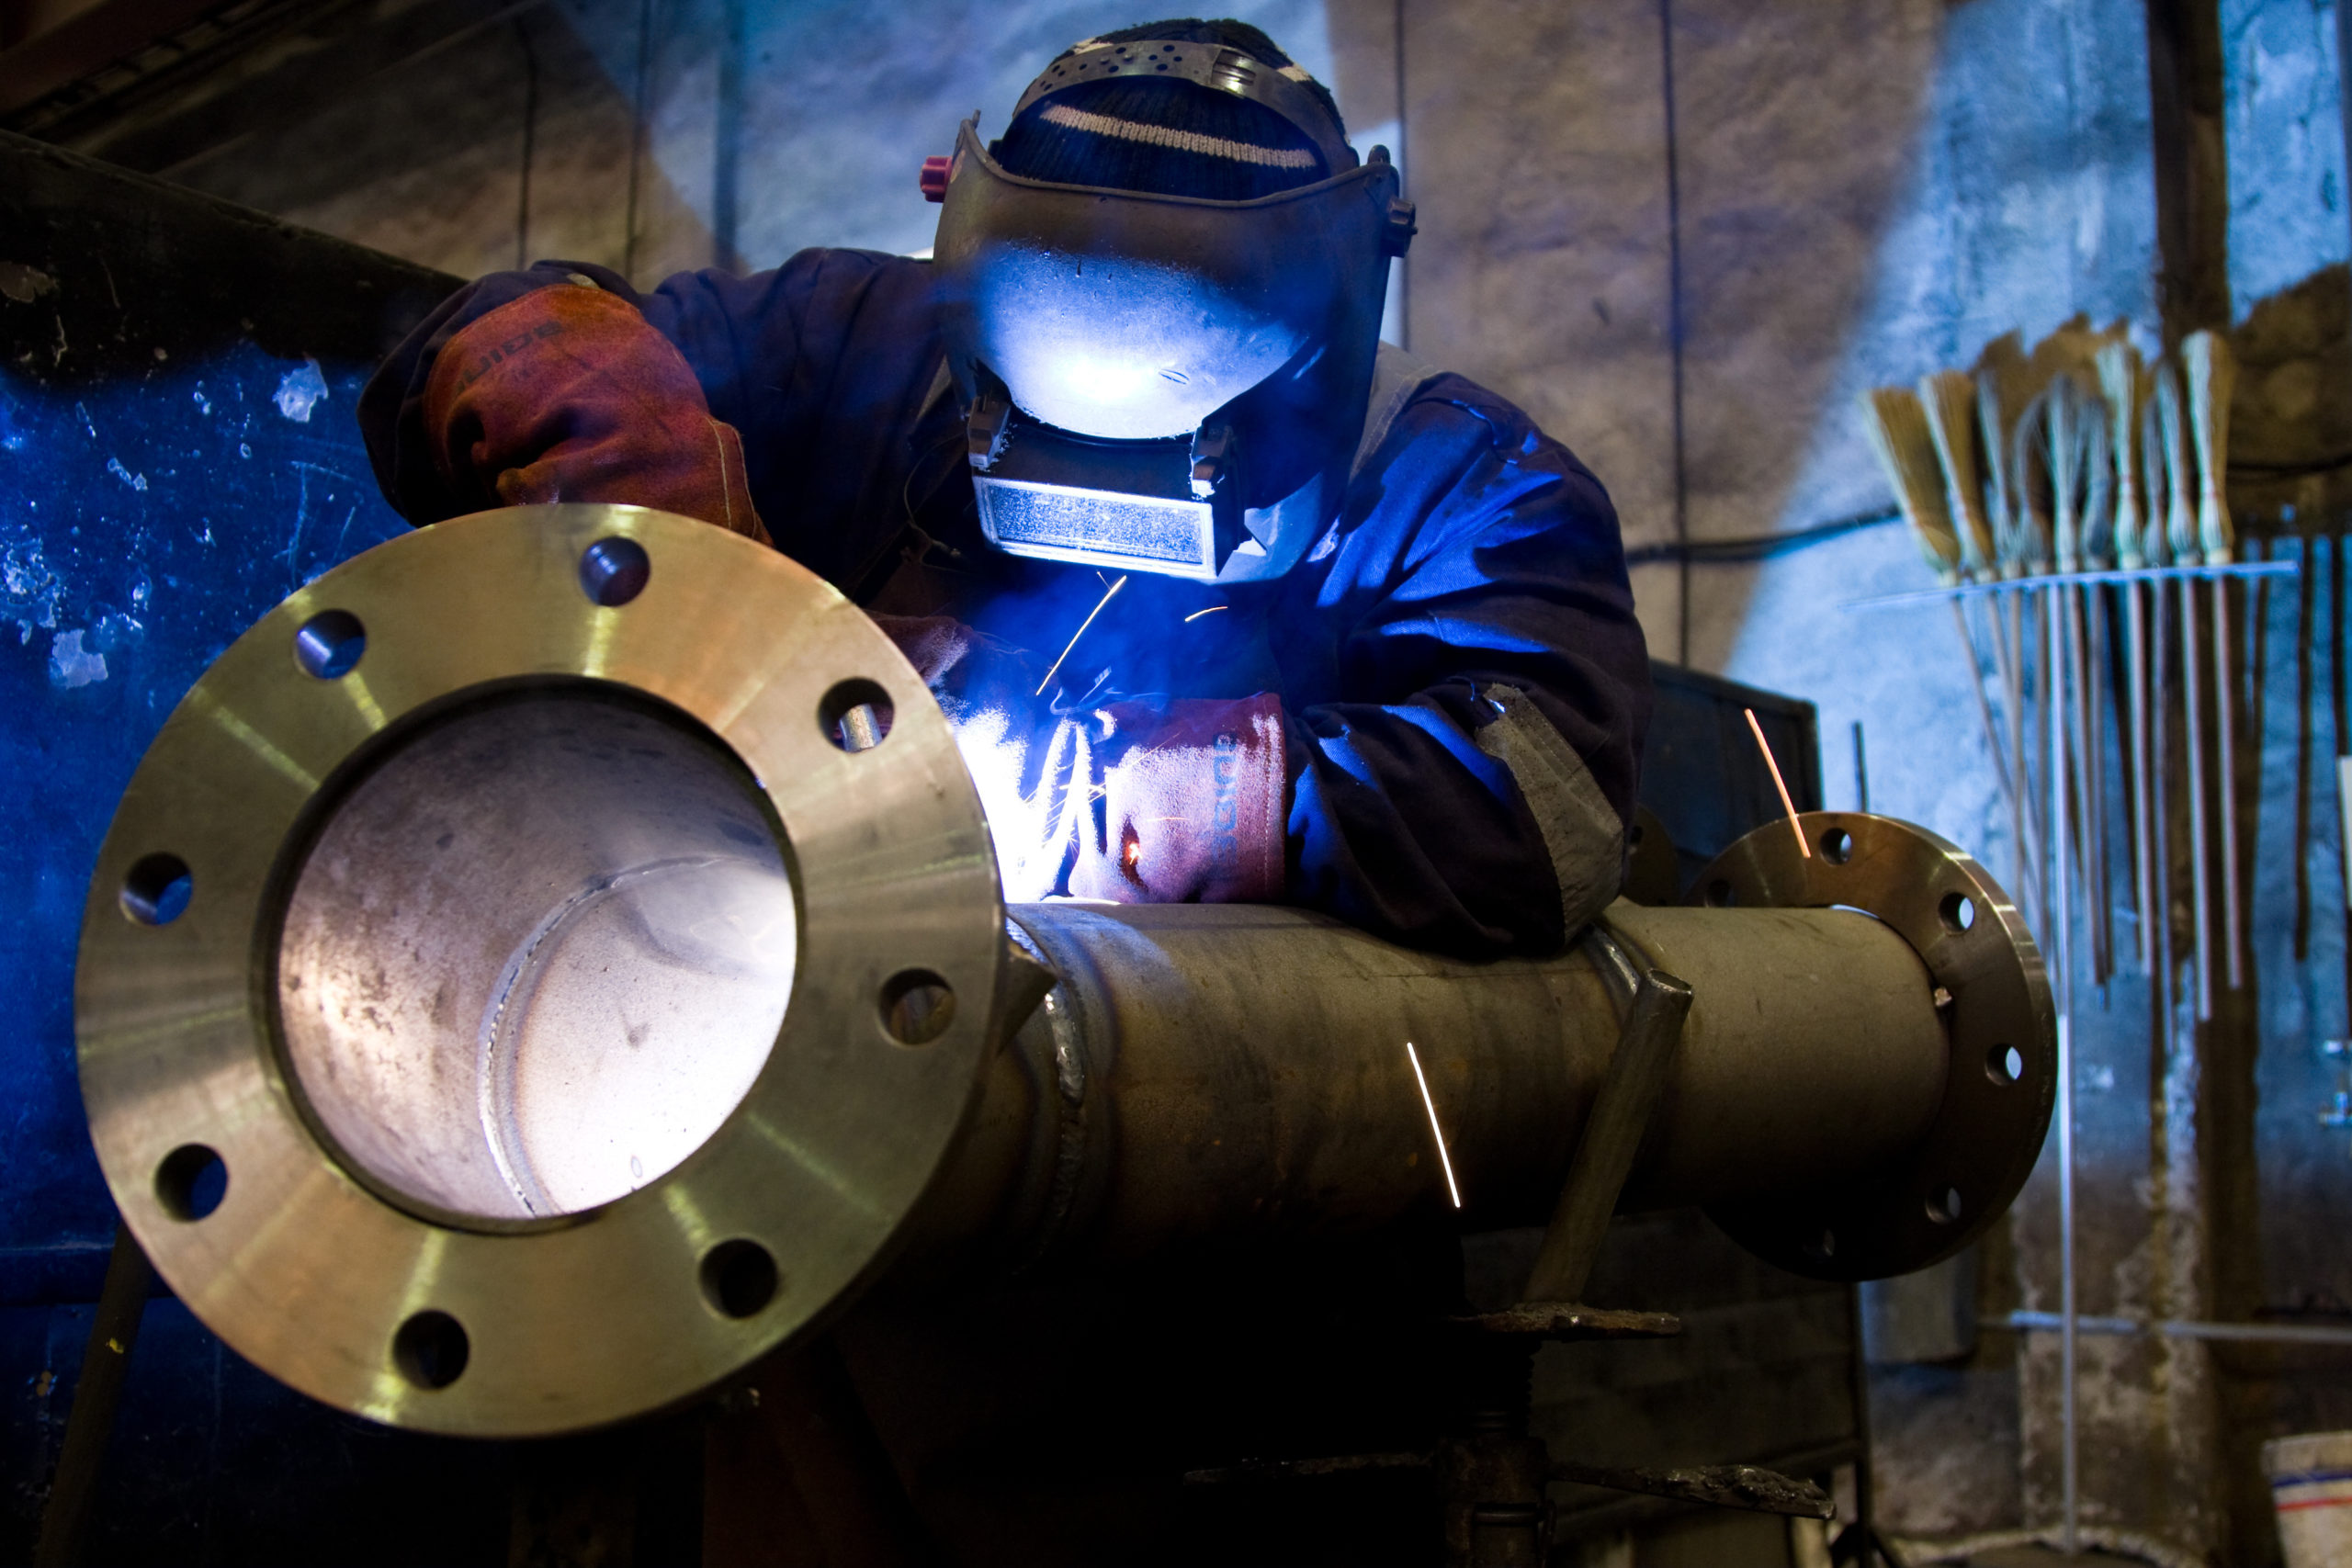 Questions to ask before hiring a welder